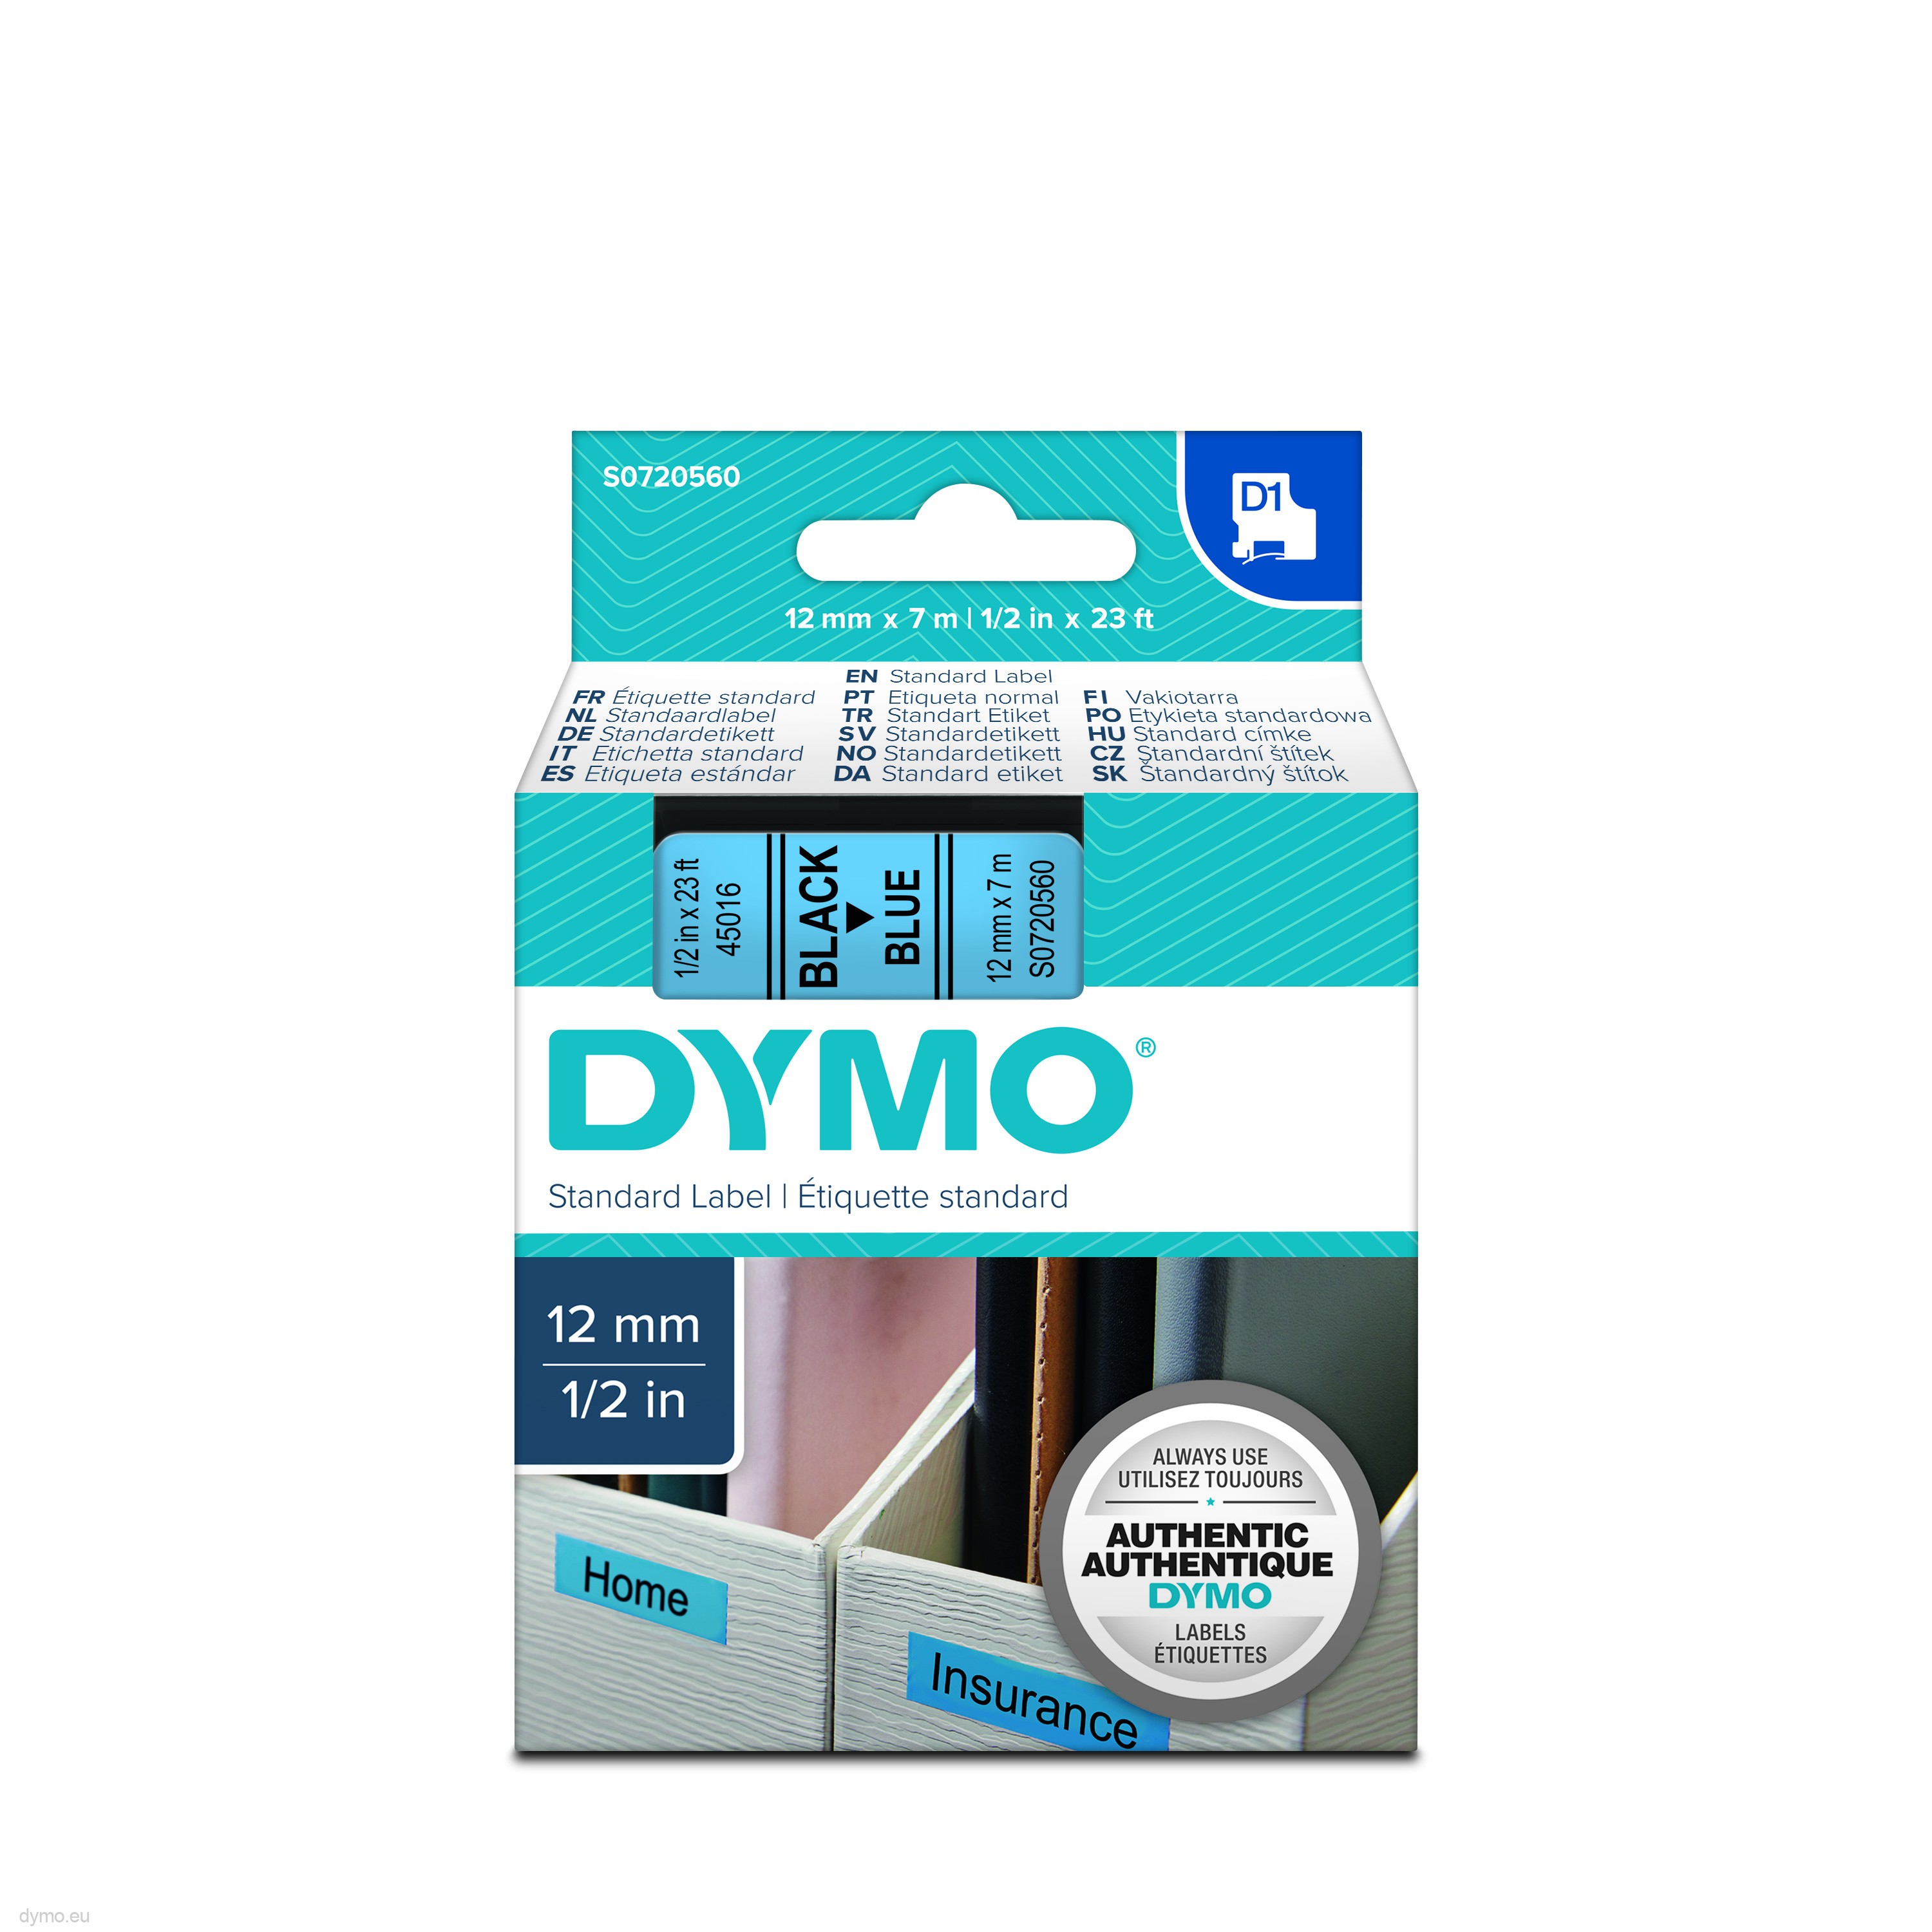 Dymo 3 Pack Black on White Label Tape Compatible for DYMO D1 45013 12mm 1/2" S0720530 